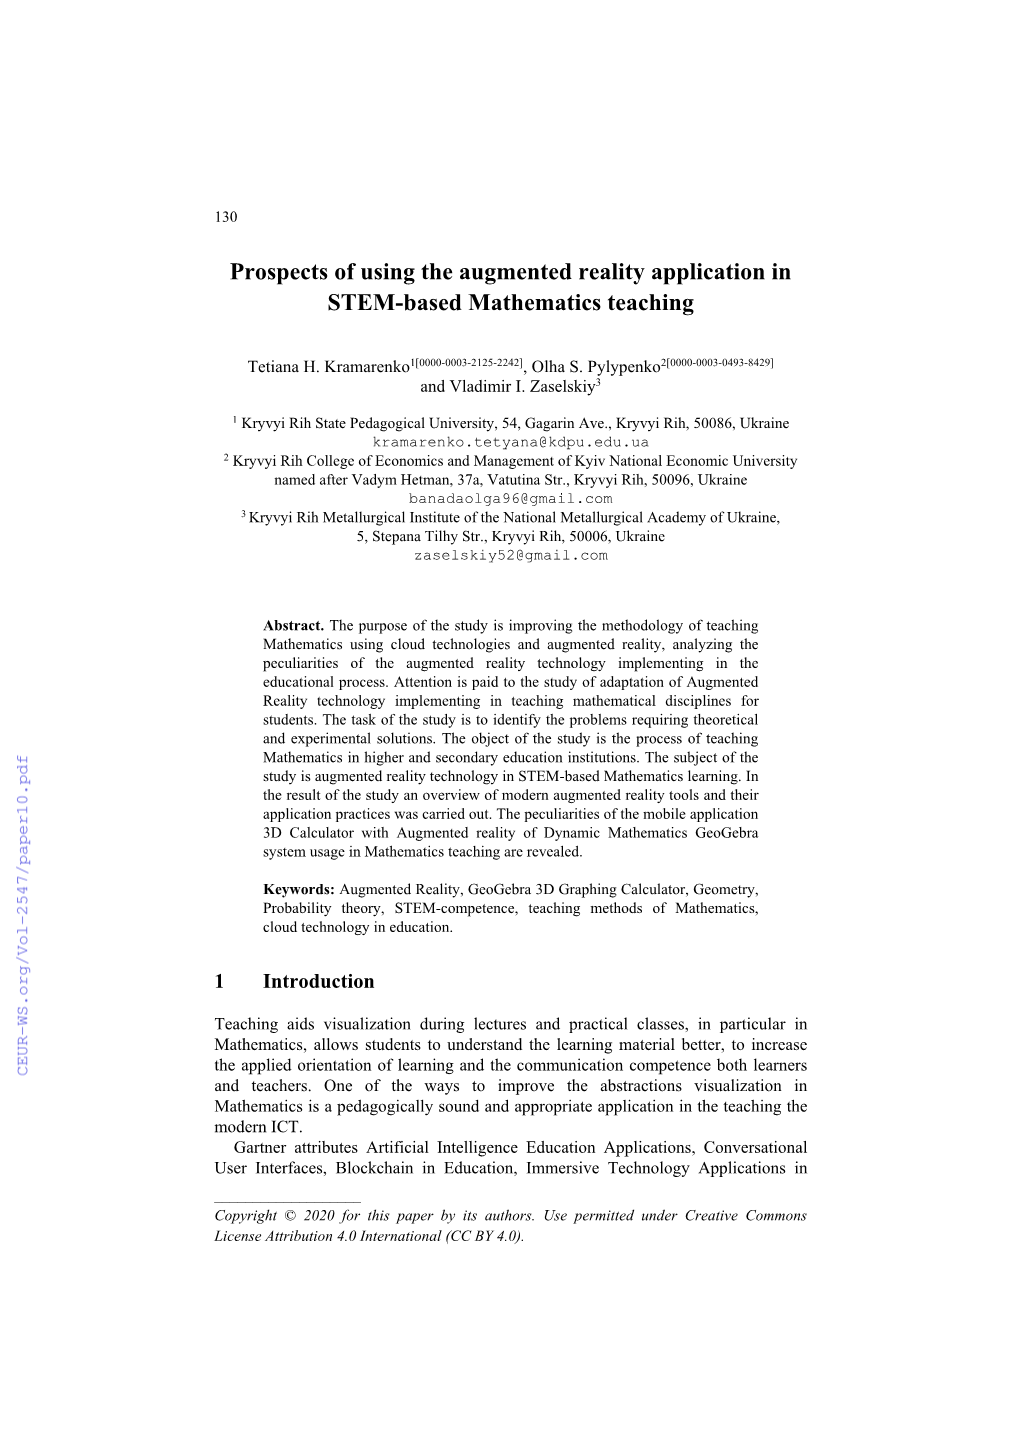 Prospects of Using the Augmented Reality Application in STEM-Based Mathematics Teaching